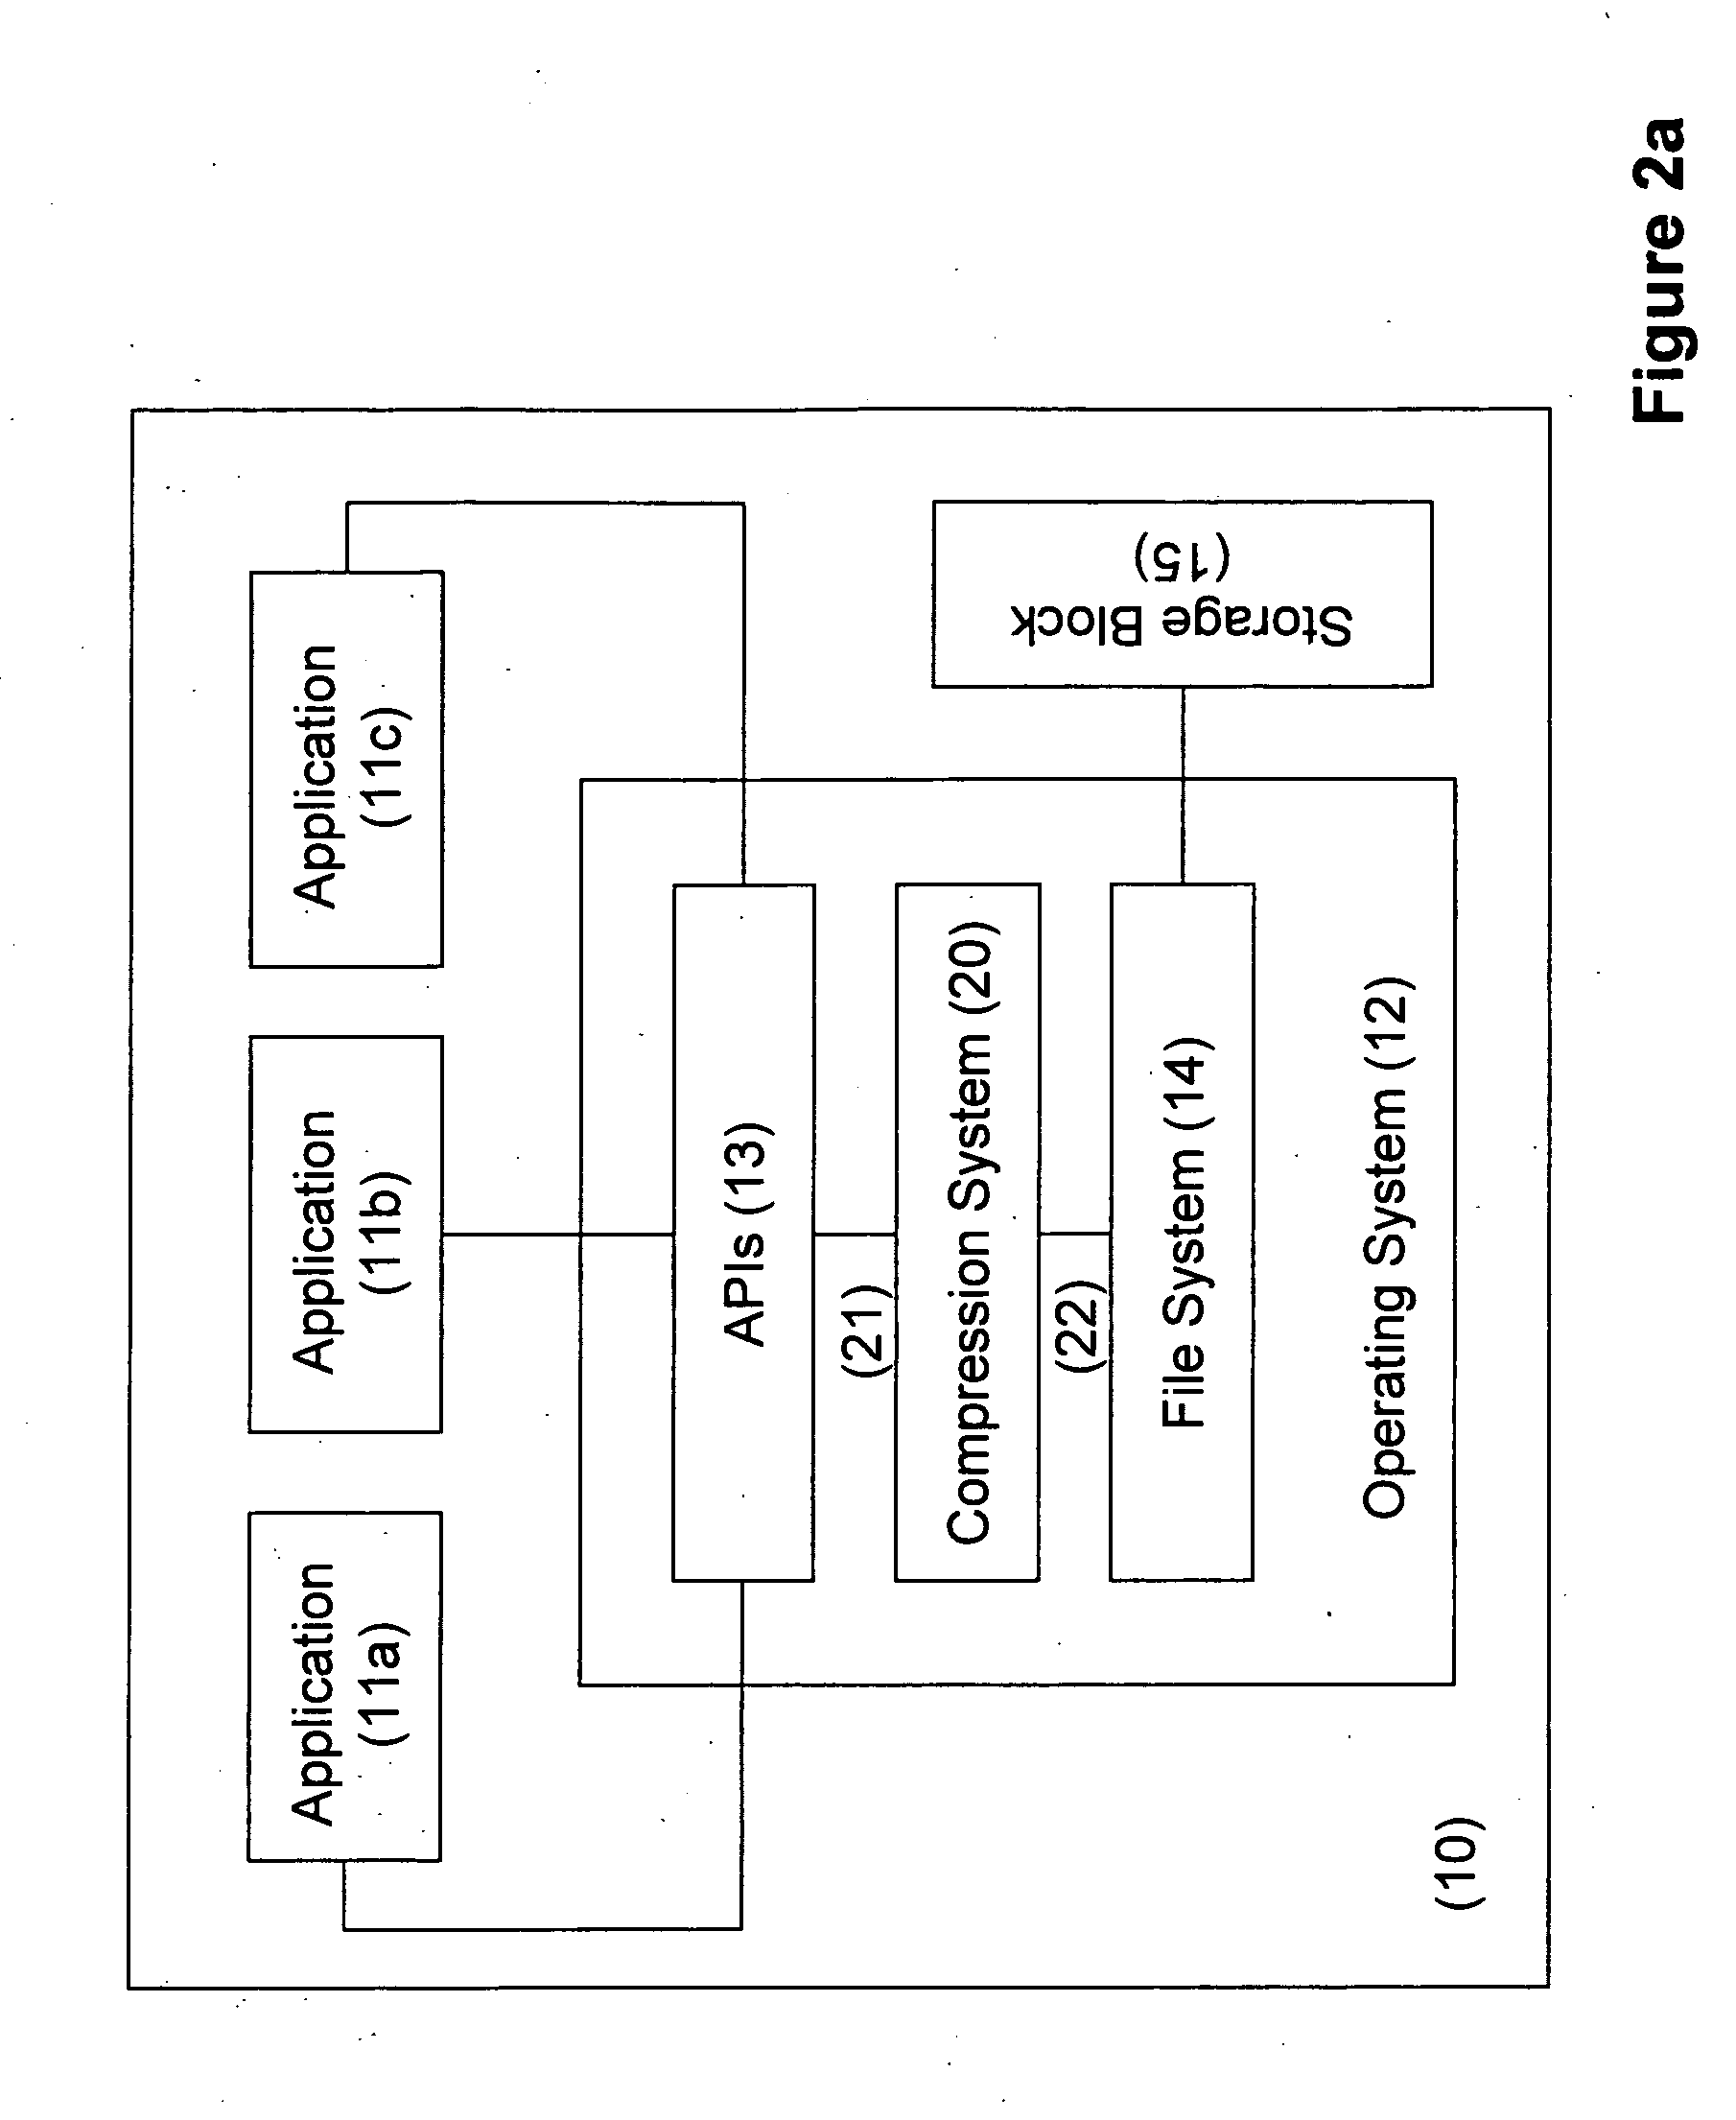 Method and system for compression of files for storage and operation on compressed files